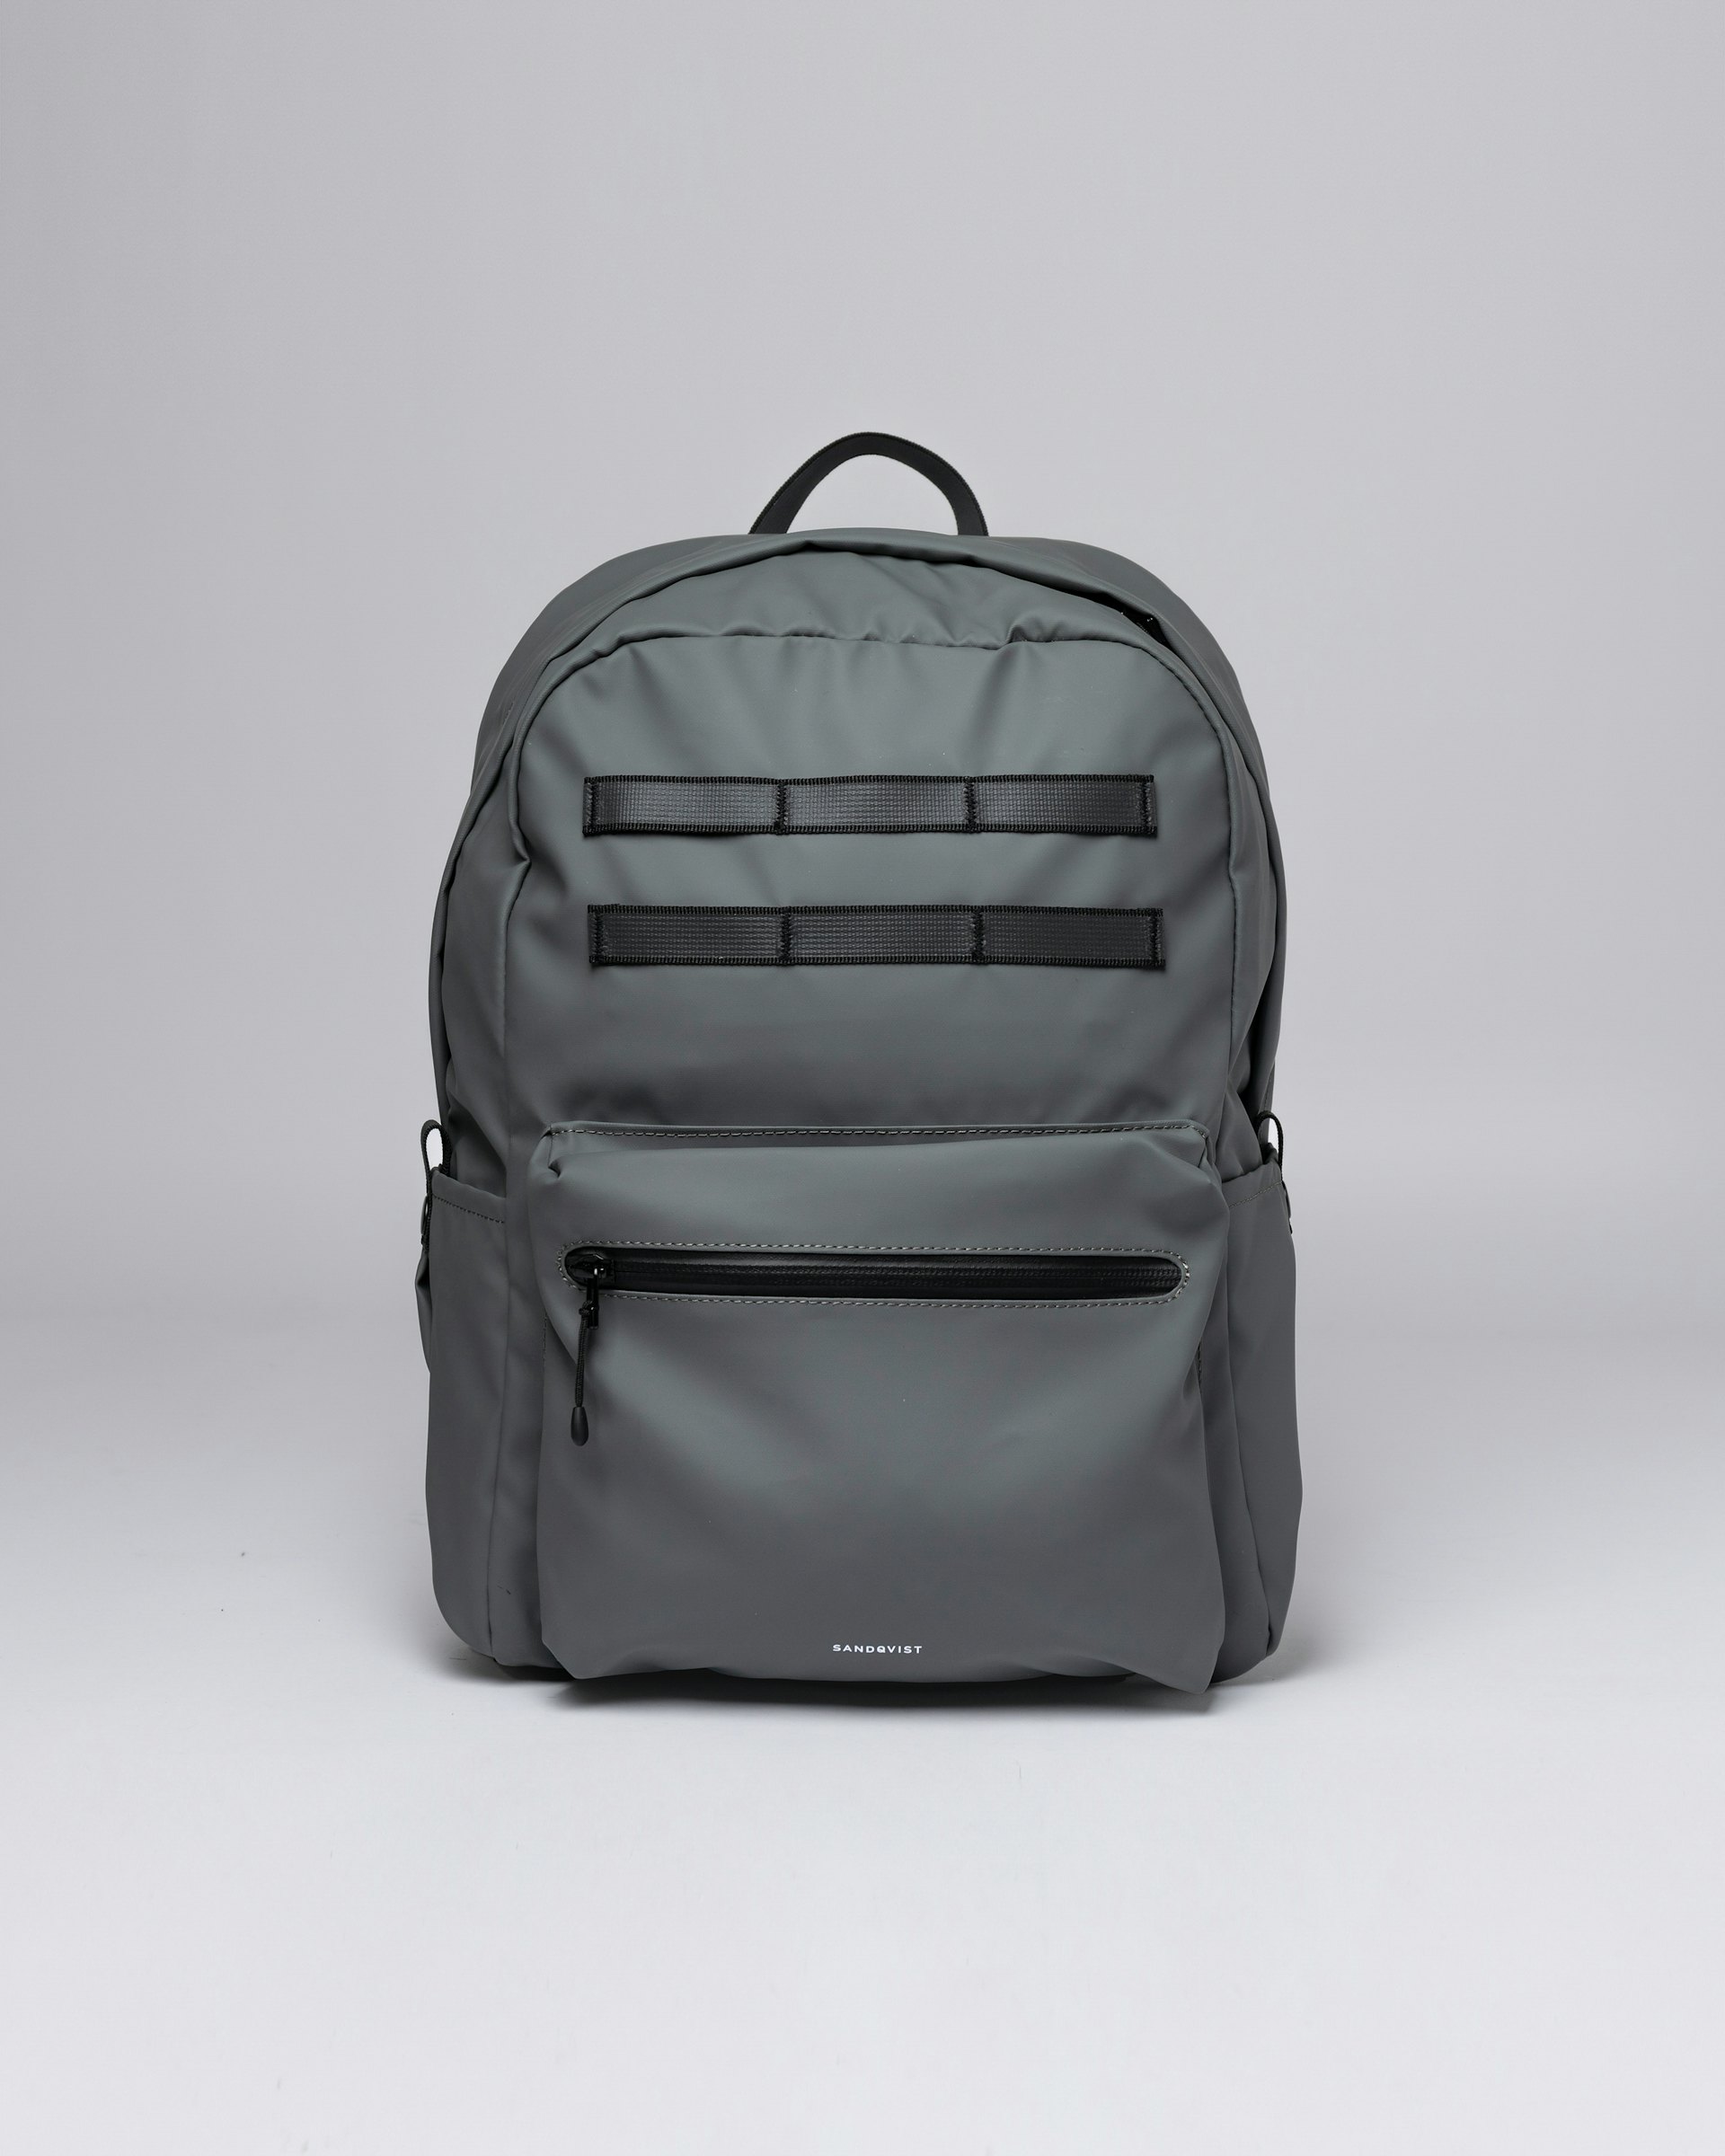 Alvar belongs to the category Backpacks and is in color ash grey